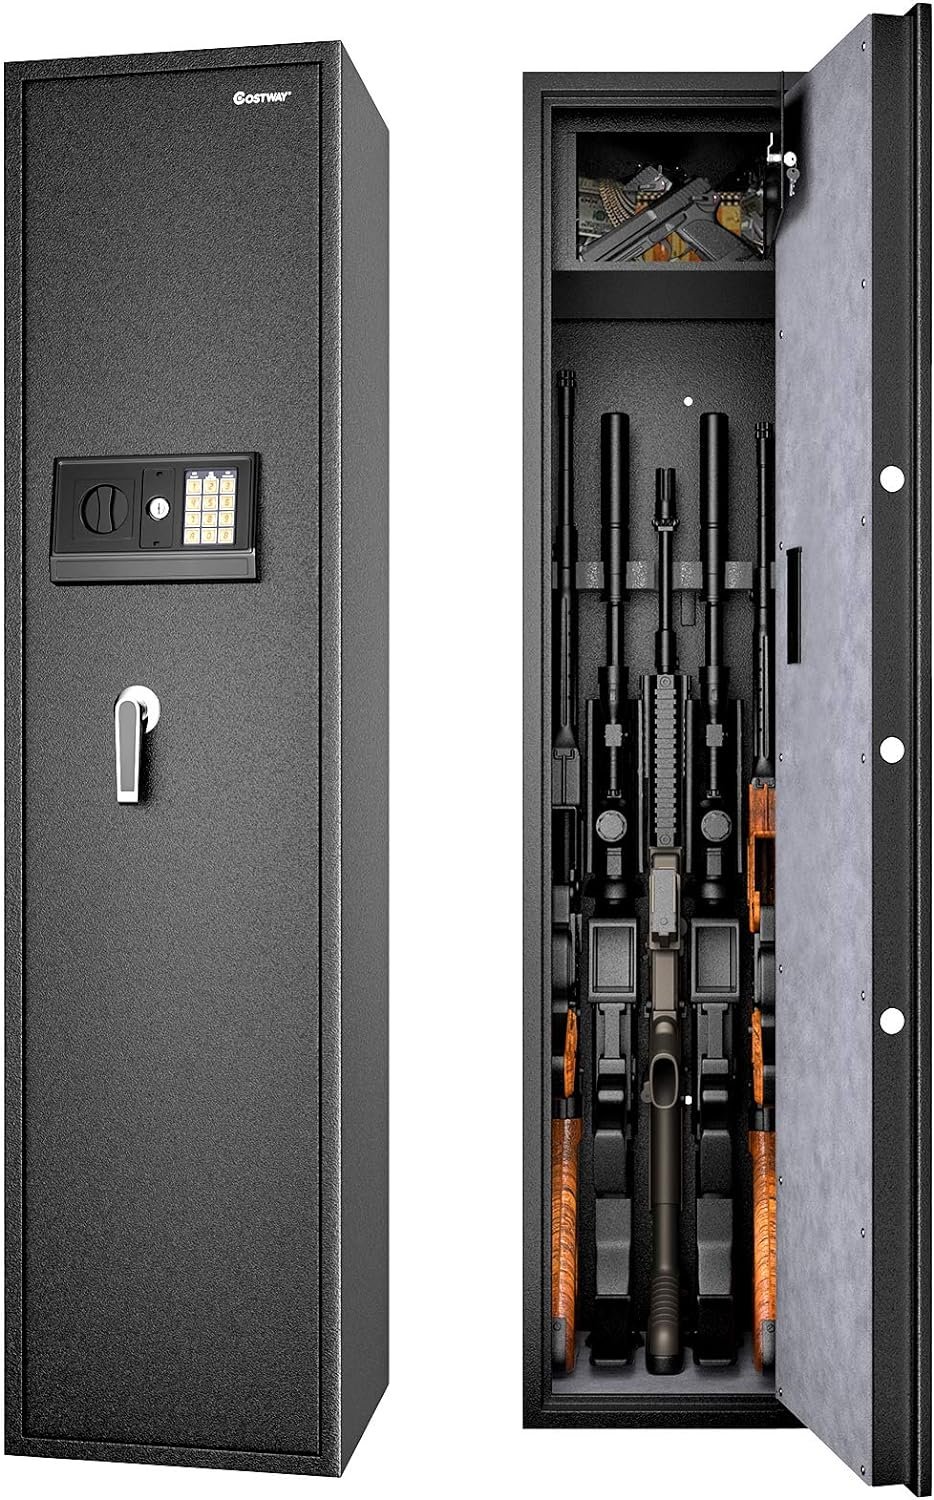 Costway Large Rifle Safe Review